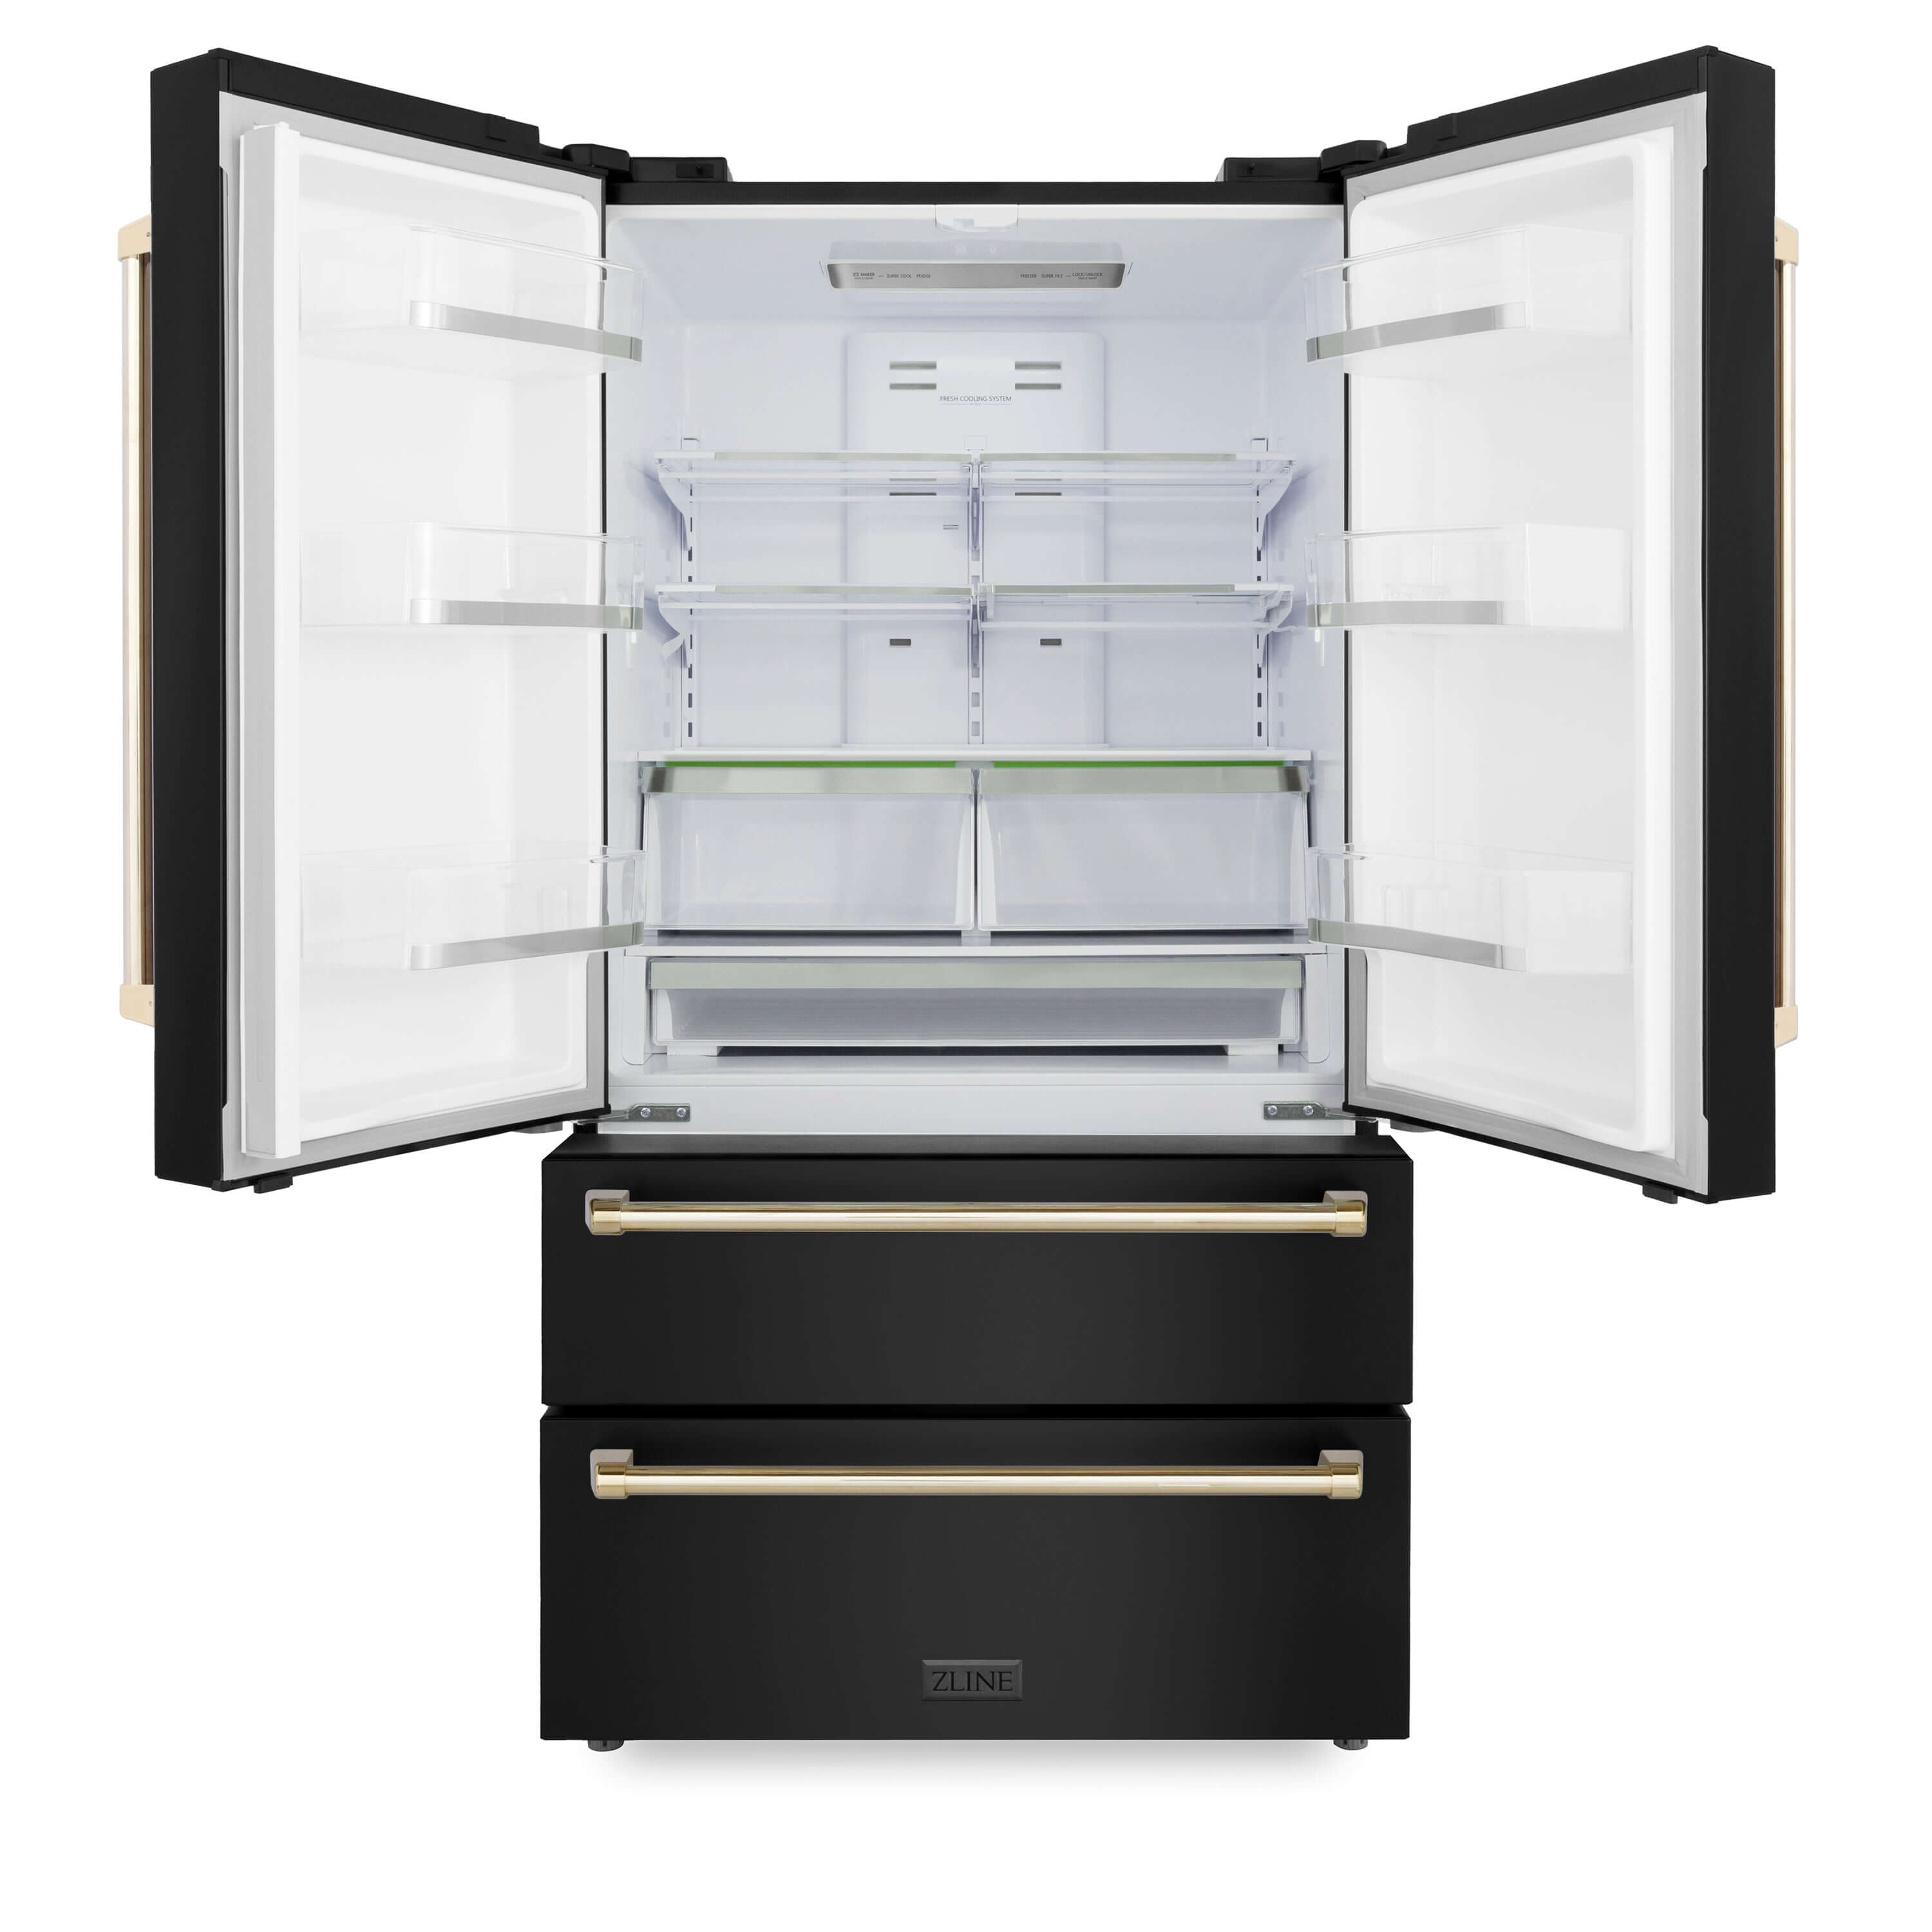 ZLINE 36 in. Black Stainless Steel French Door Refrigerator front with Polished Gold handles doors open.